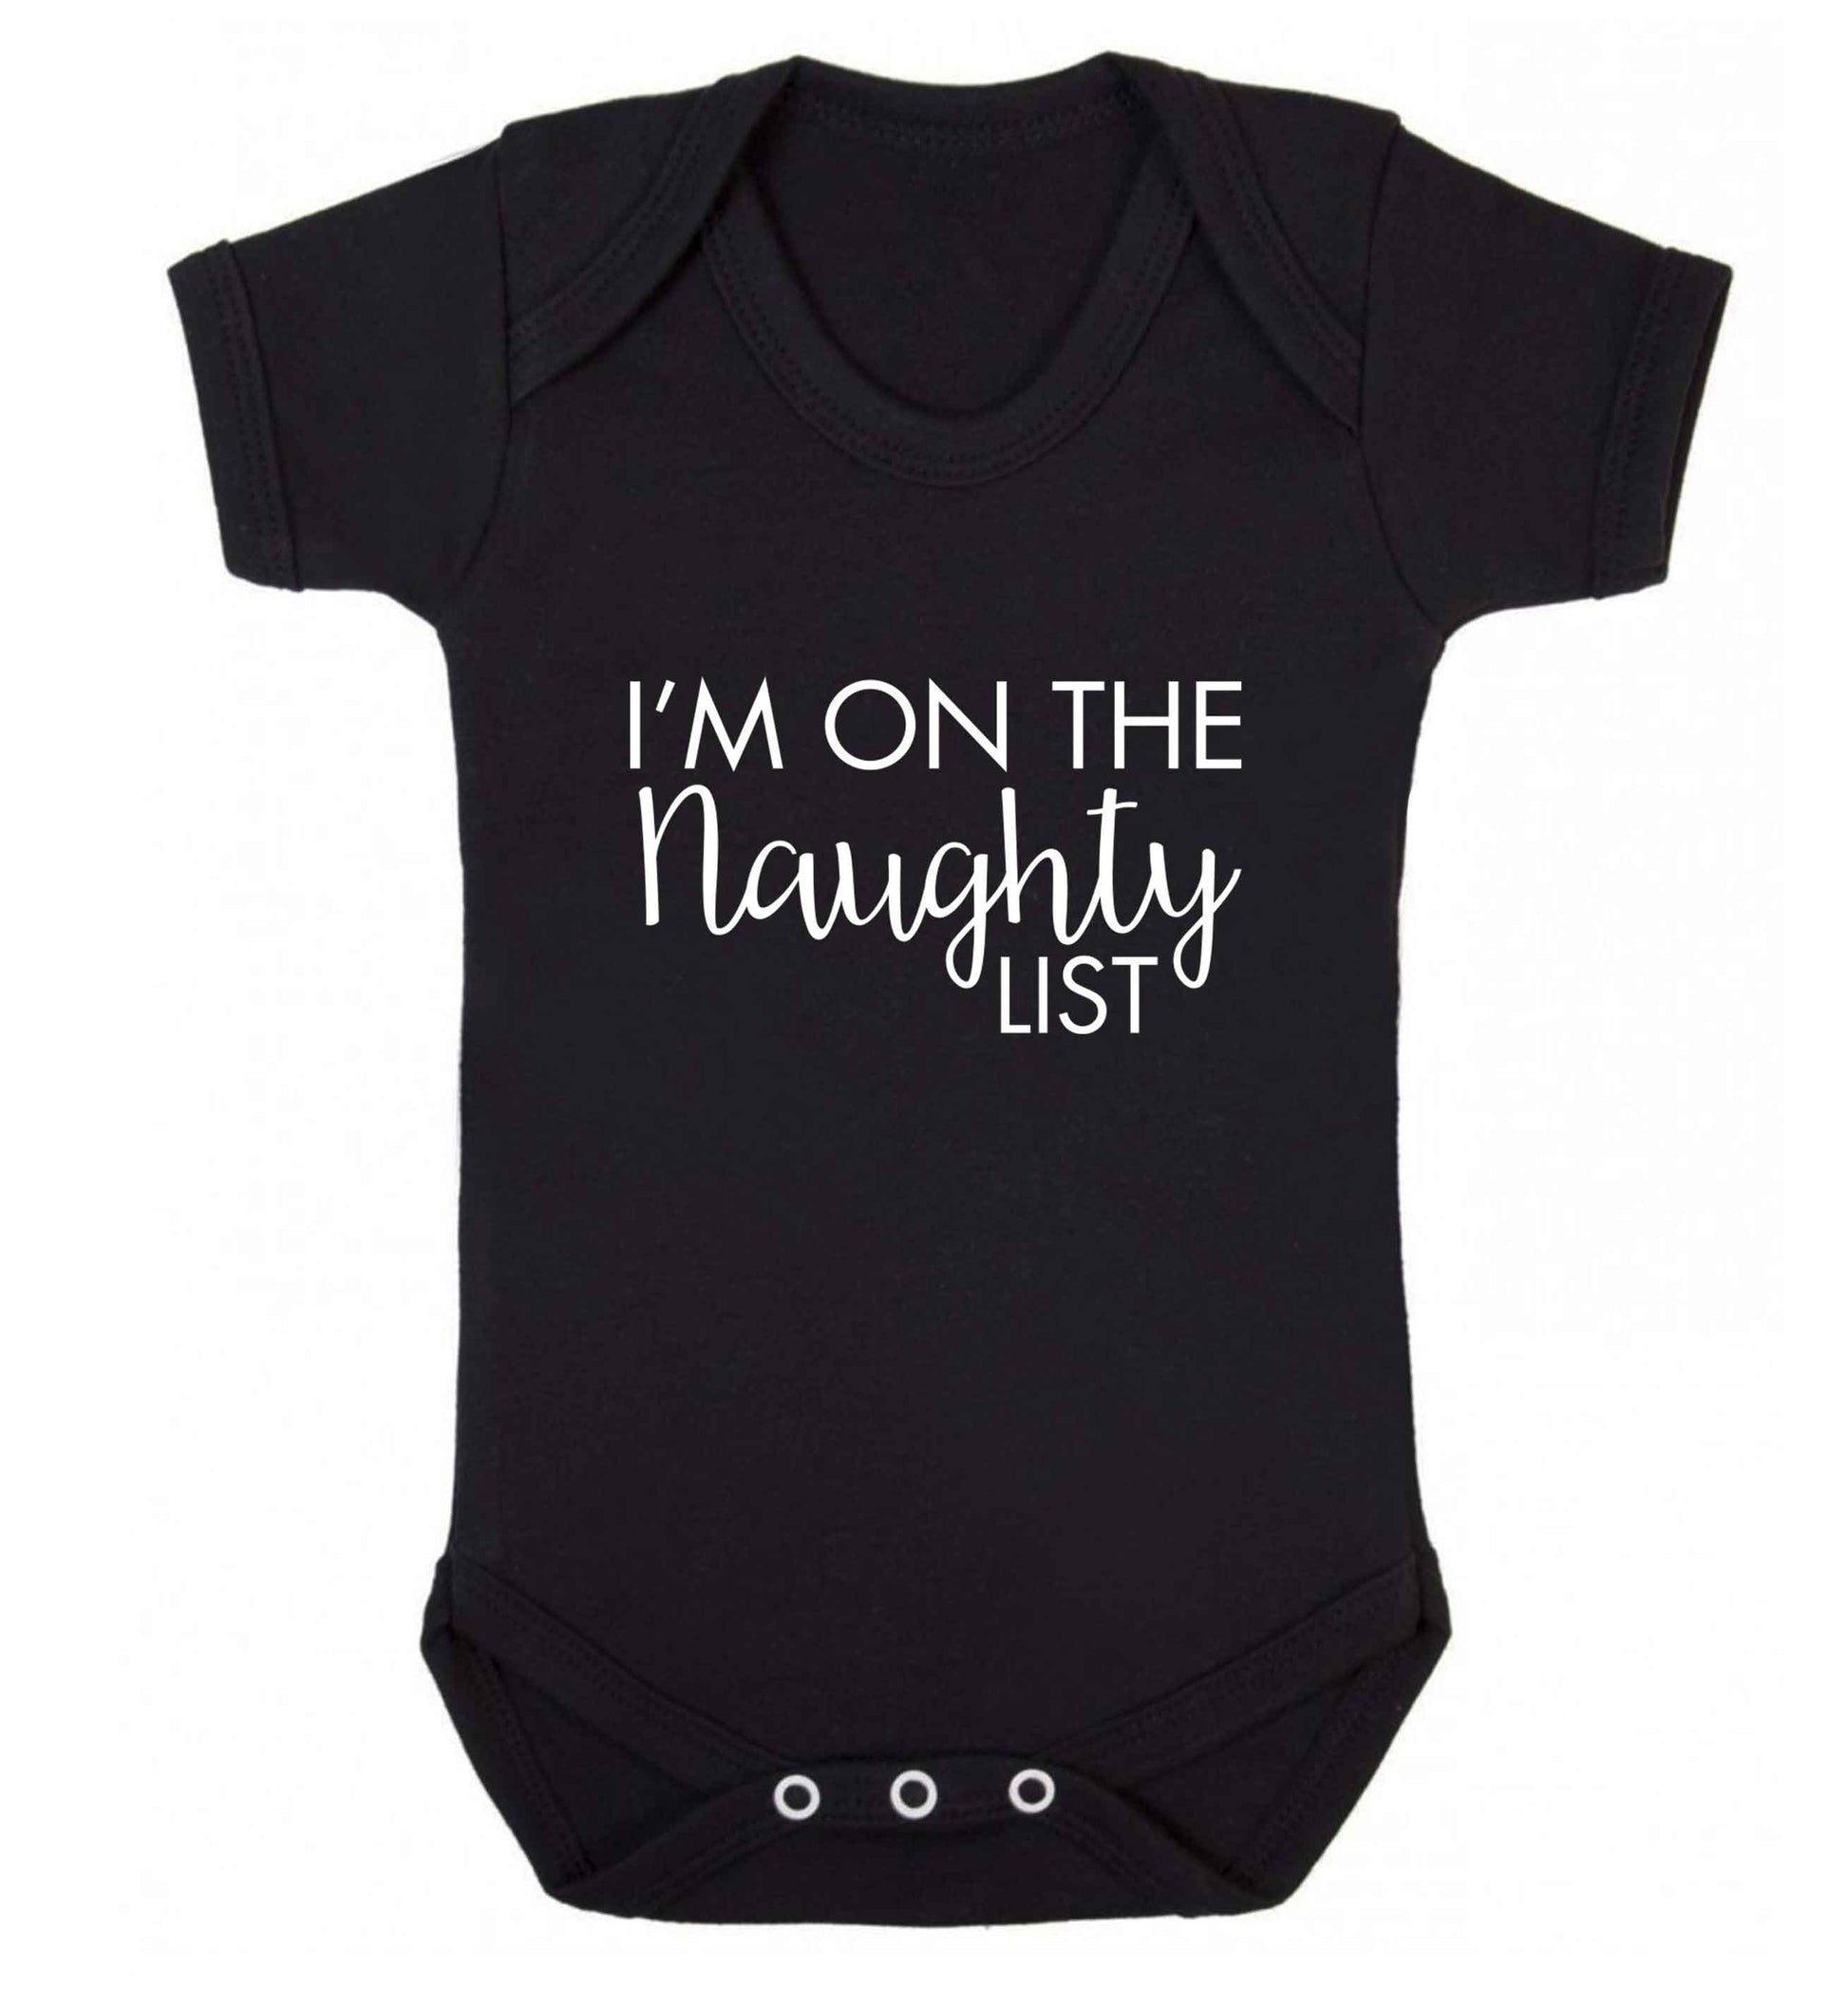 I'm on the naughty list baby vest black 18-24 months